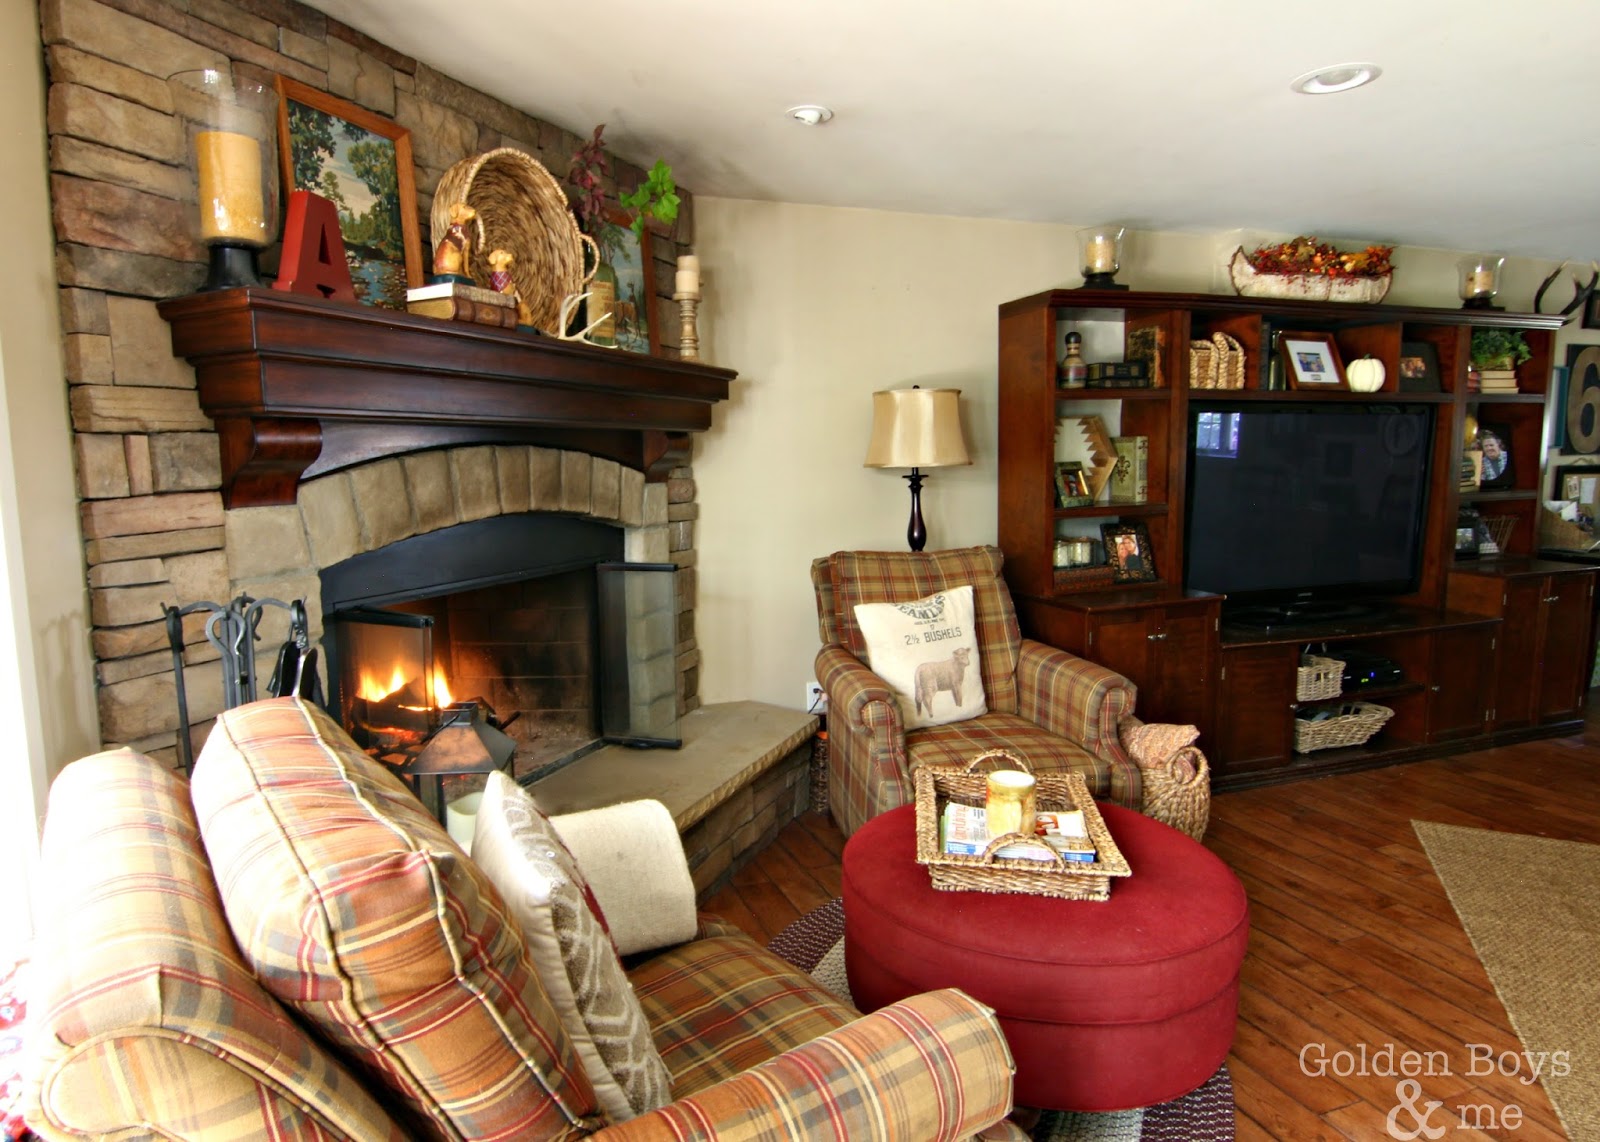 Family room with corner stone fireplace and Pottery Barn inspired wall unit-www.goldenboysandme.com